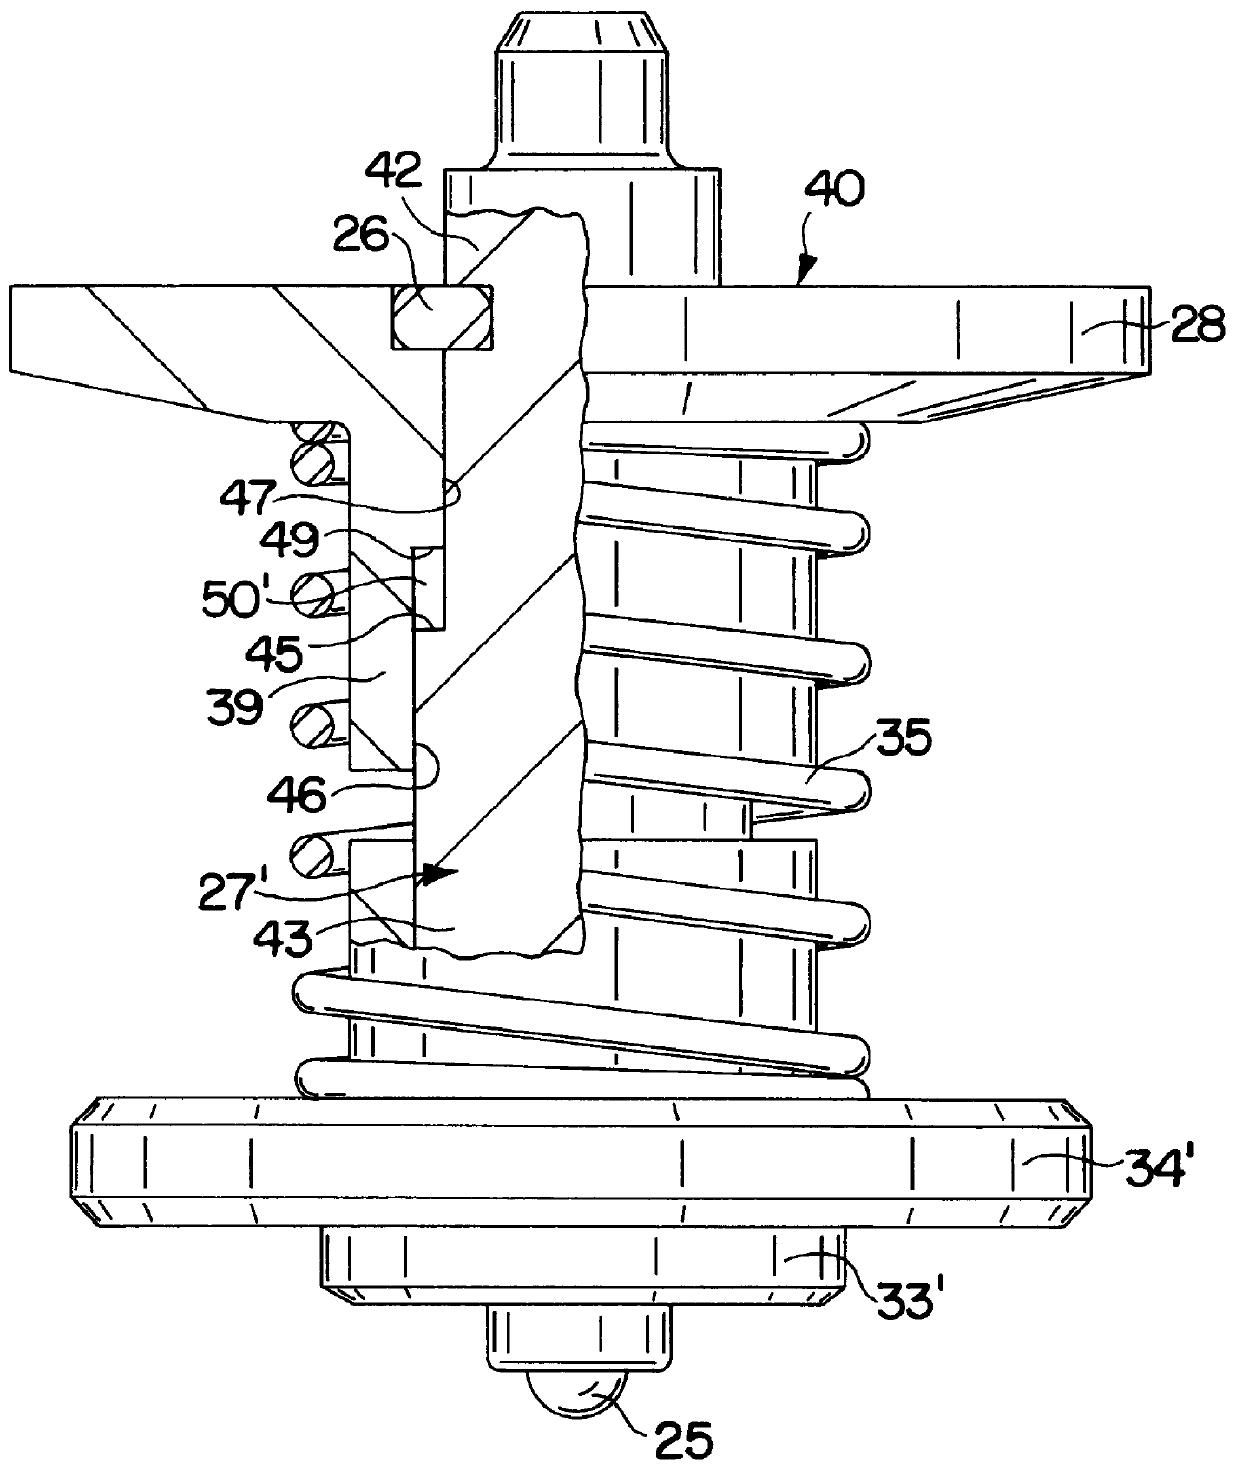 Solenoid valve for controlling an electrically controlled fuel ignition valve